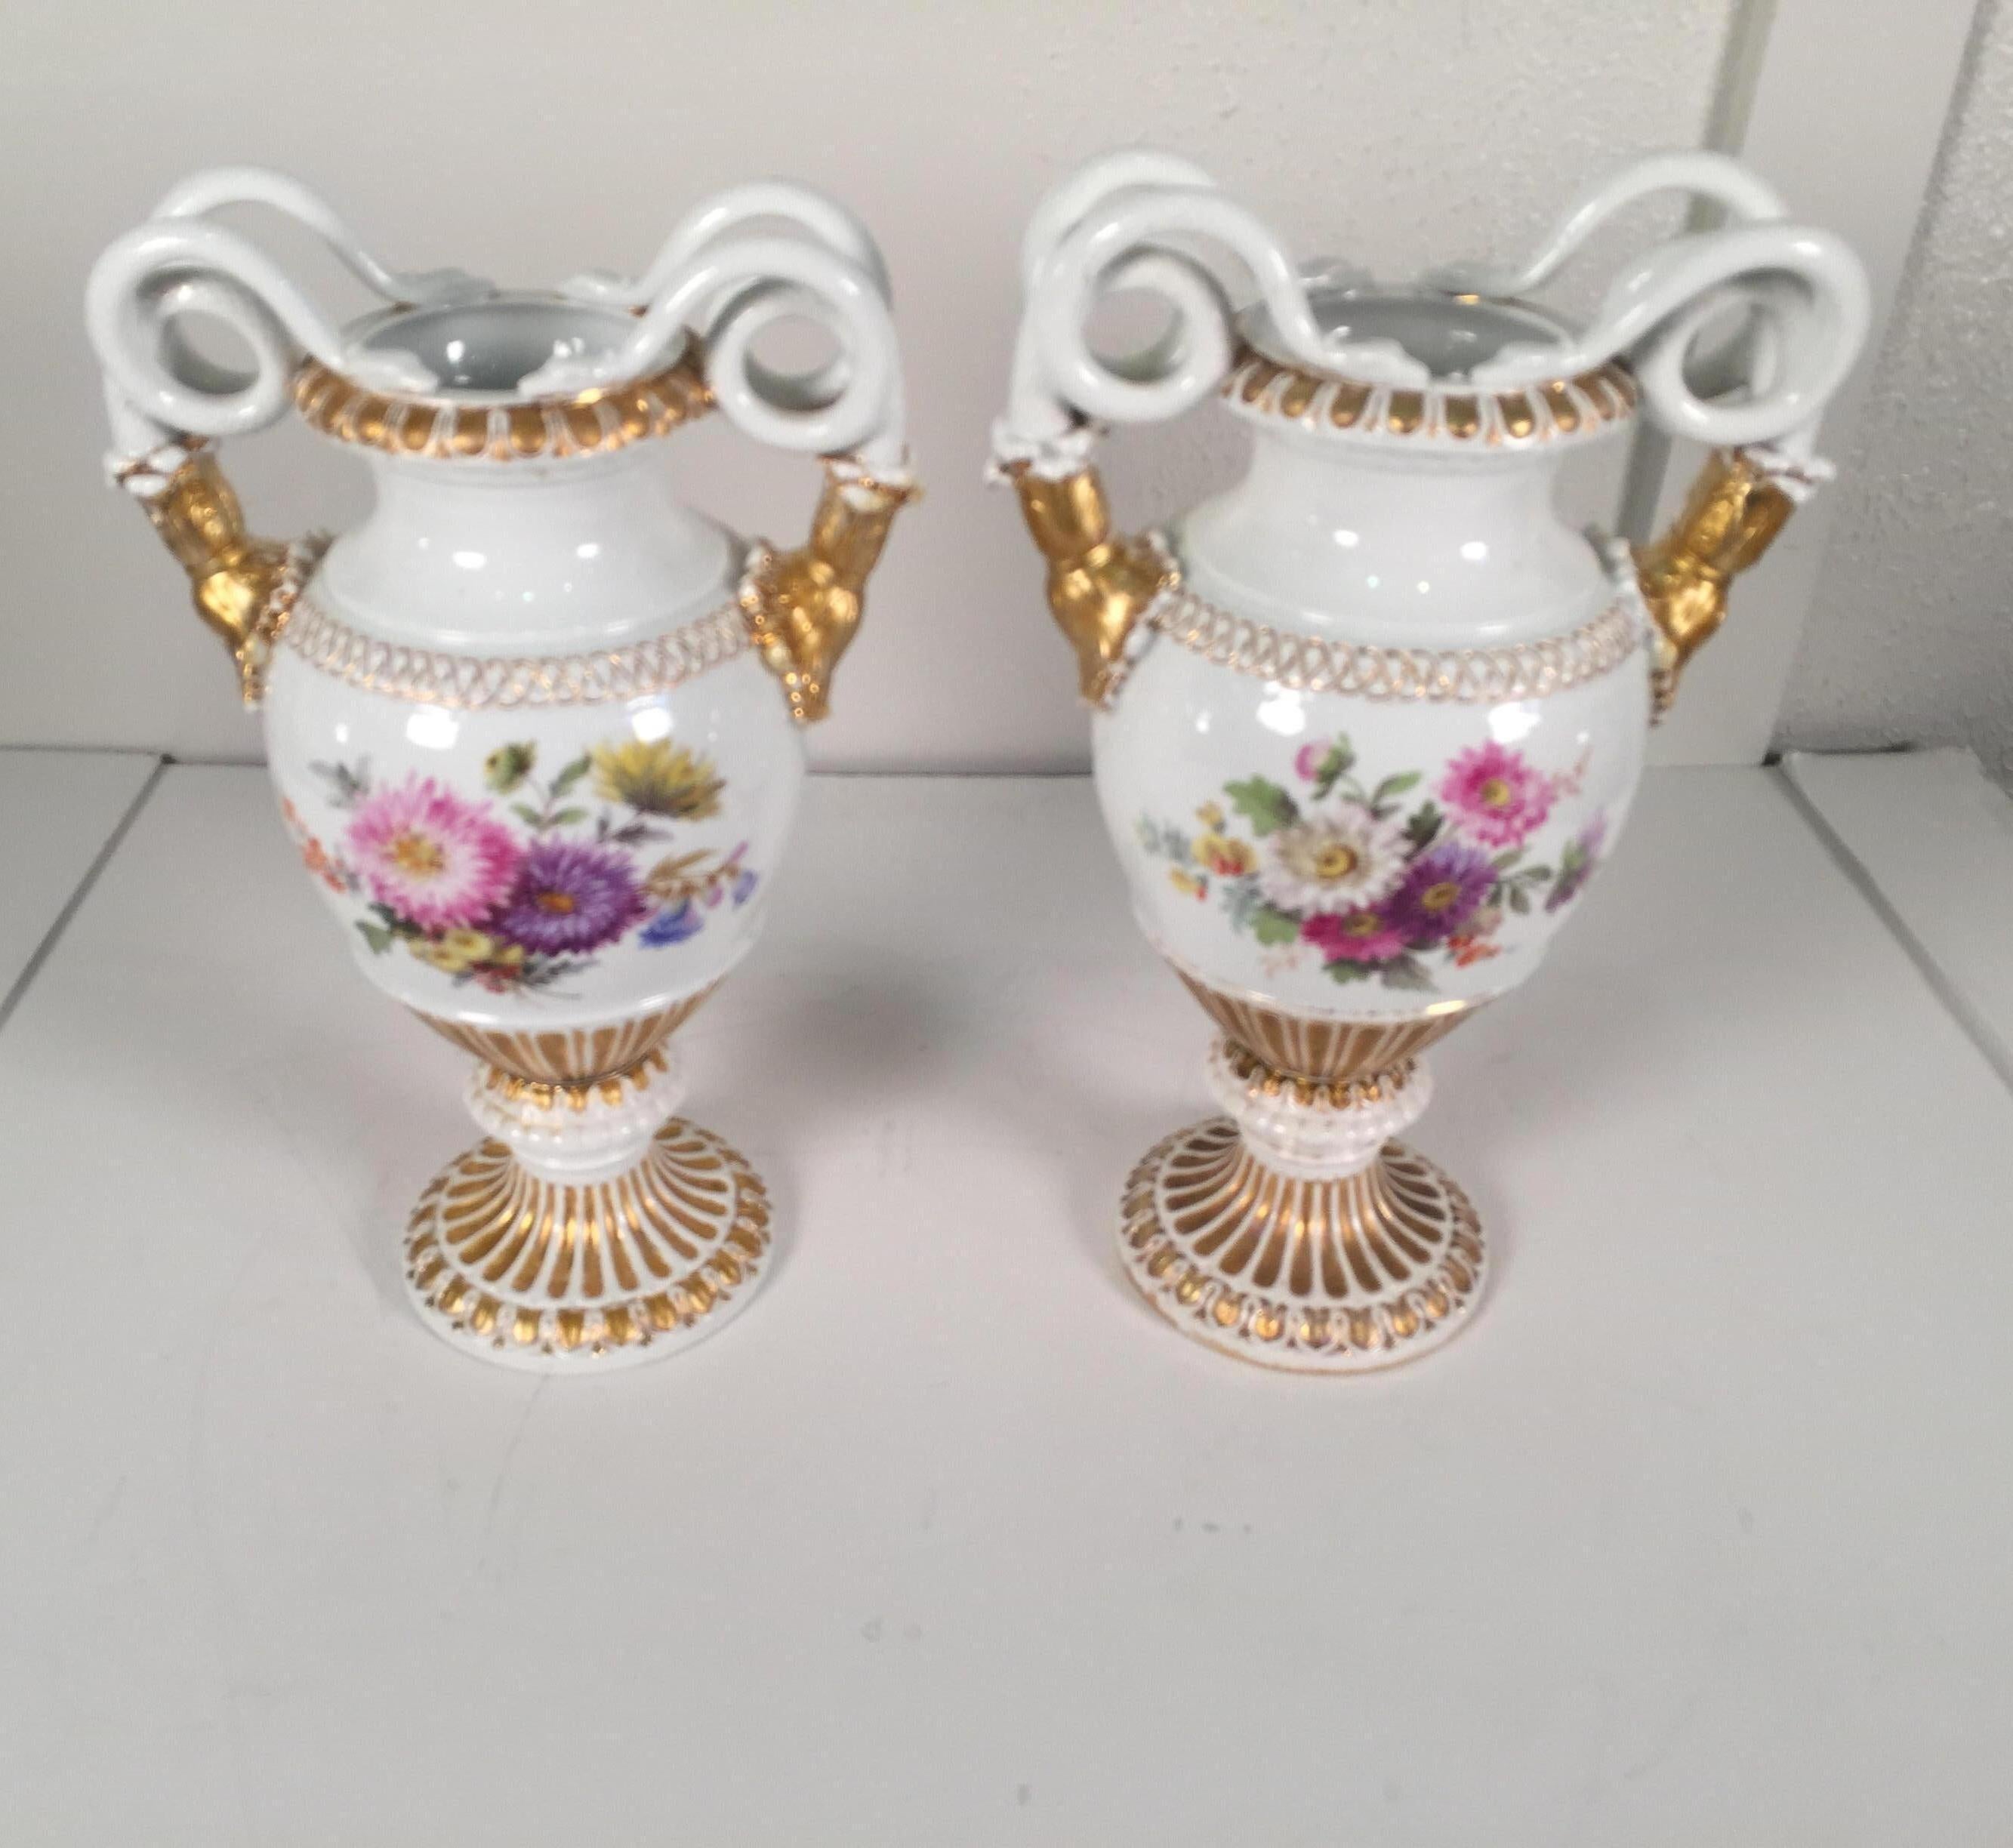 Classic pair of German porcelain hand painted and gilt Meissen snake handled urns. The hand painted floral back and front with different floral bouquet cartouches with gilt handles and pedestal bases. Each one with the Meissen cross swards mark in